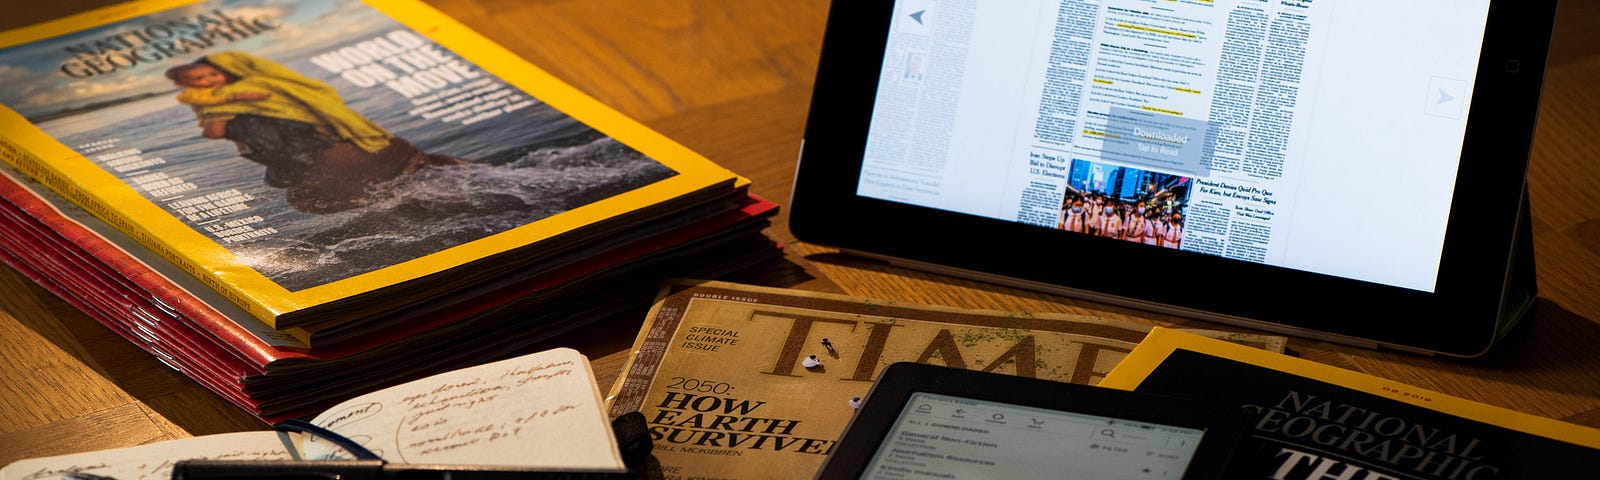 Display of magazines and newspapers, in print and digital, along with a Kindle and a pocket notebook and pens on a desk. | © Florian Schoppmeier